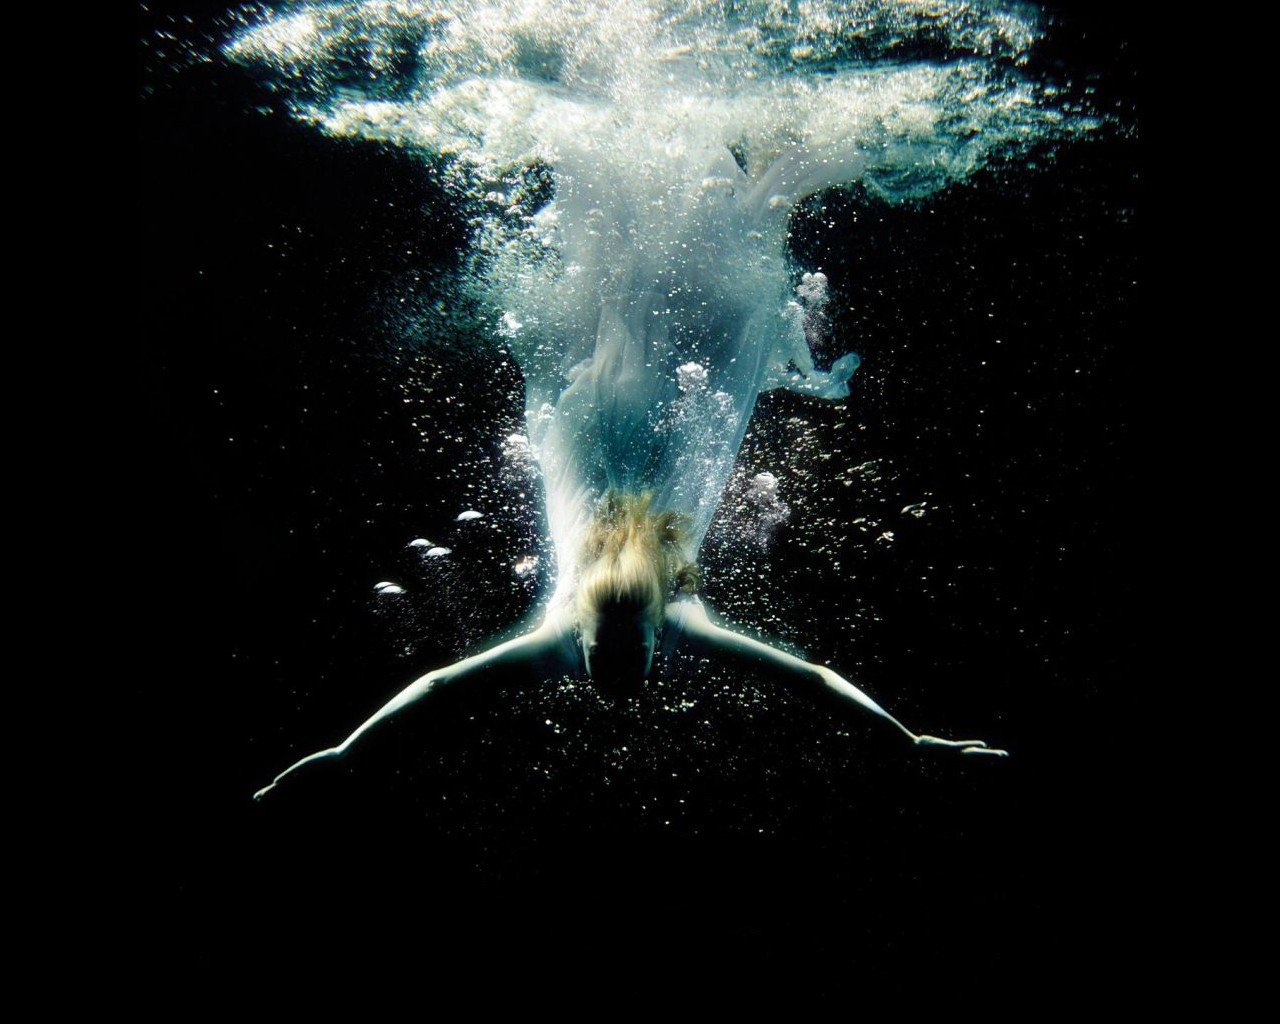 The Chemical Brothers, Album covers, Underwater HD Wallpapers / Desktop ...